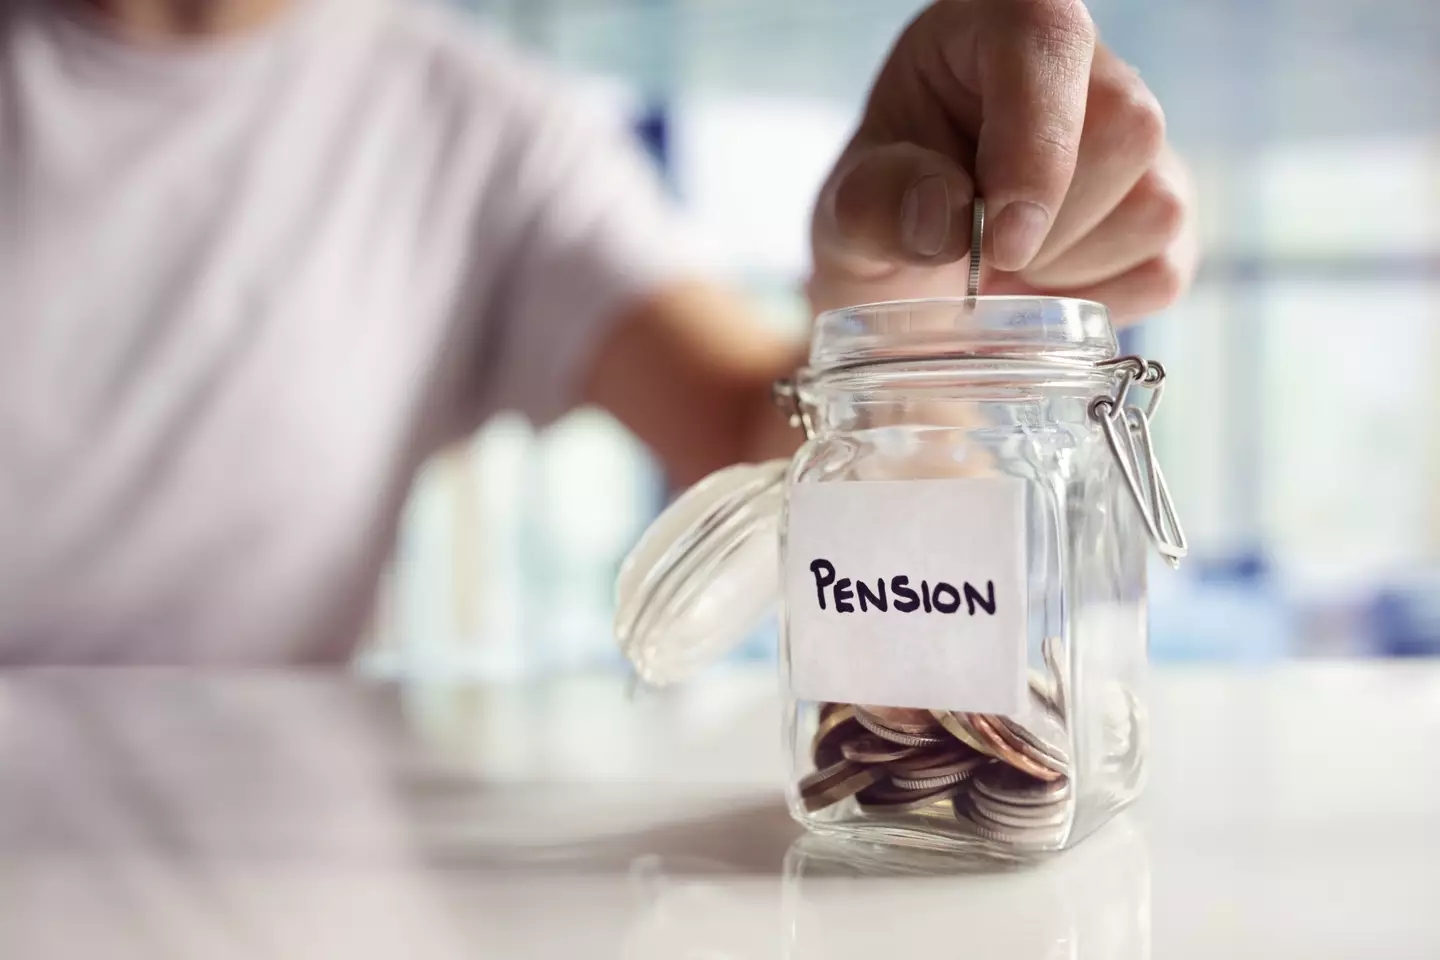 A lot of Brits don't know how much they should be putting in their pensions.